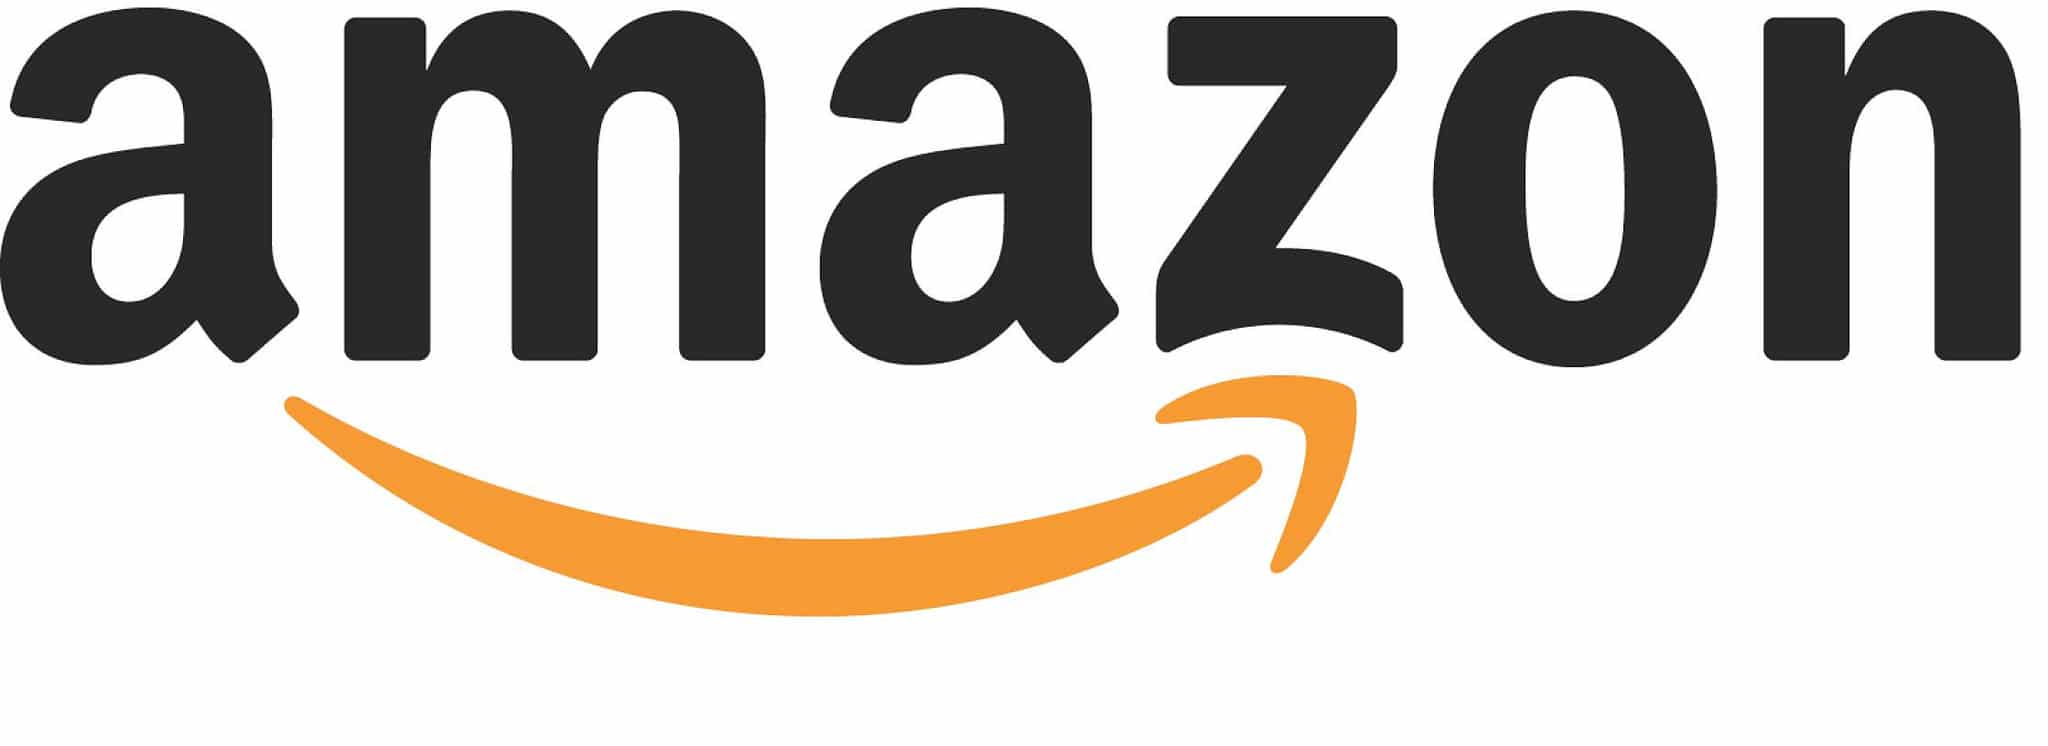  most expensive items on amazon, most expensive thing on amazon,  most expensive amazon items, most expensive products on amazon